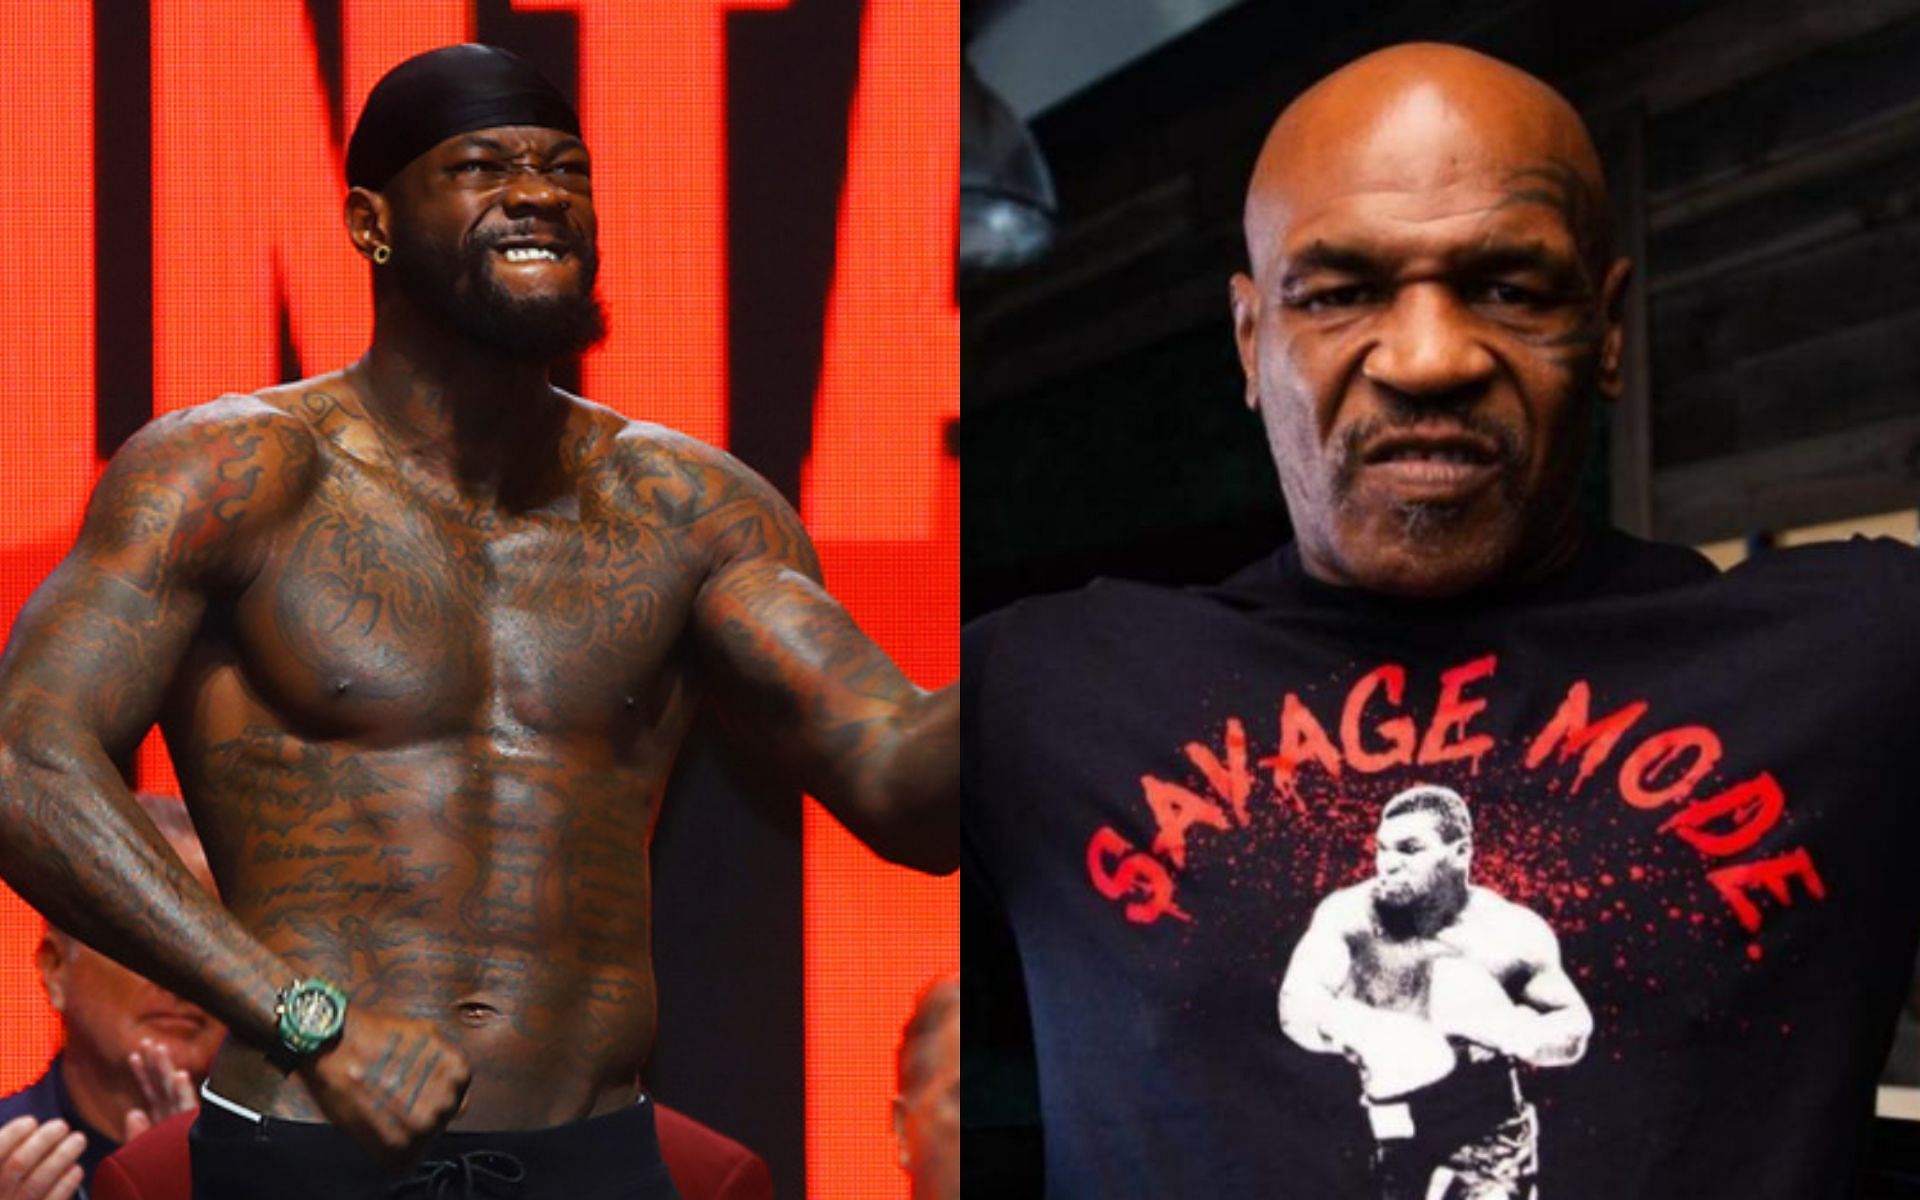 Deontay Wilder (left) and Mike Tyson (right)